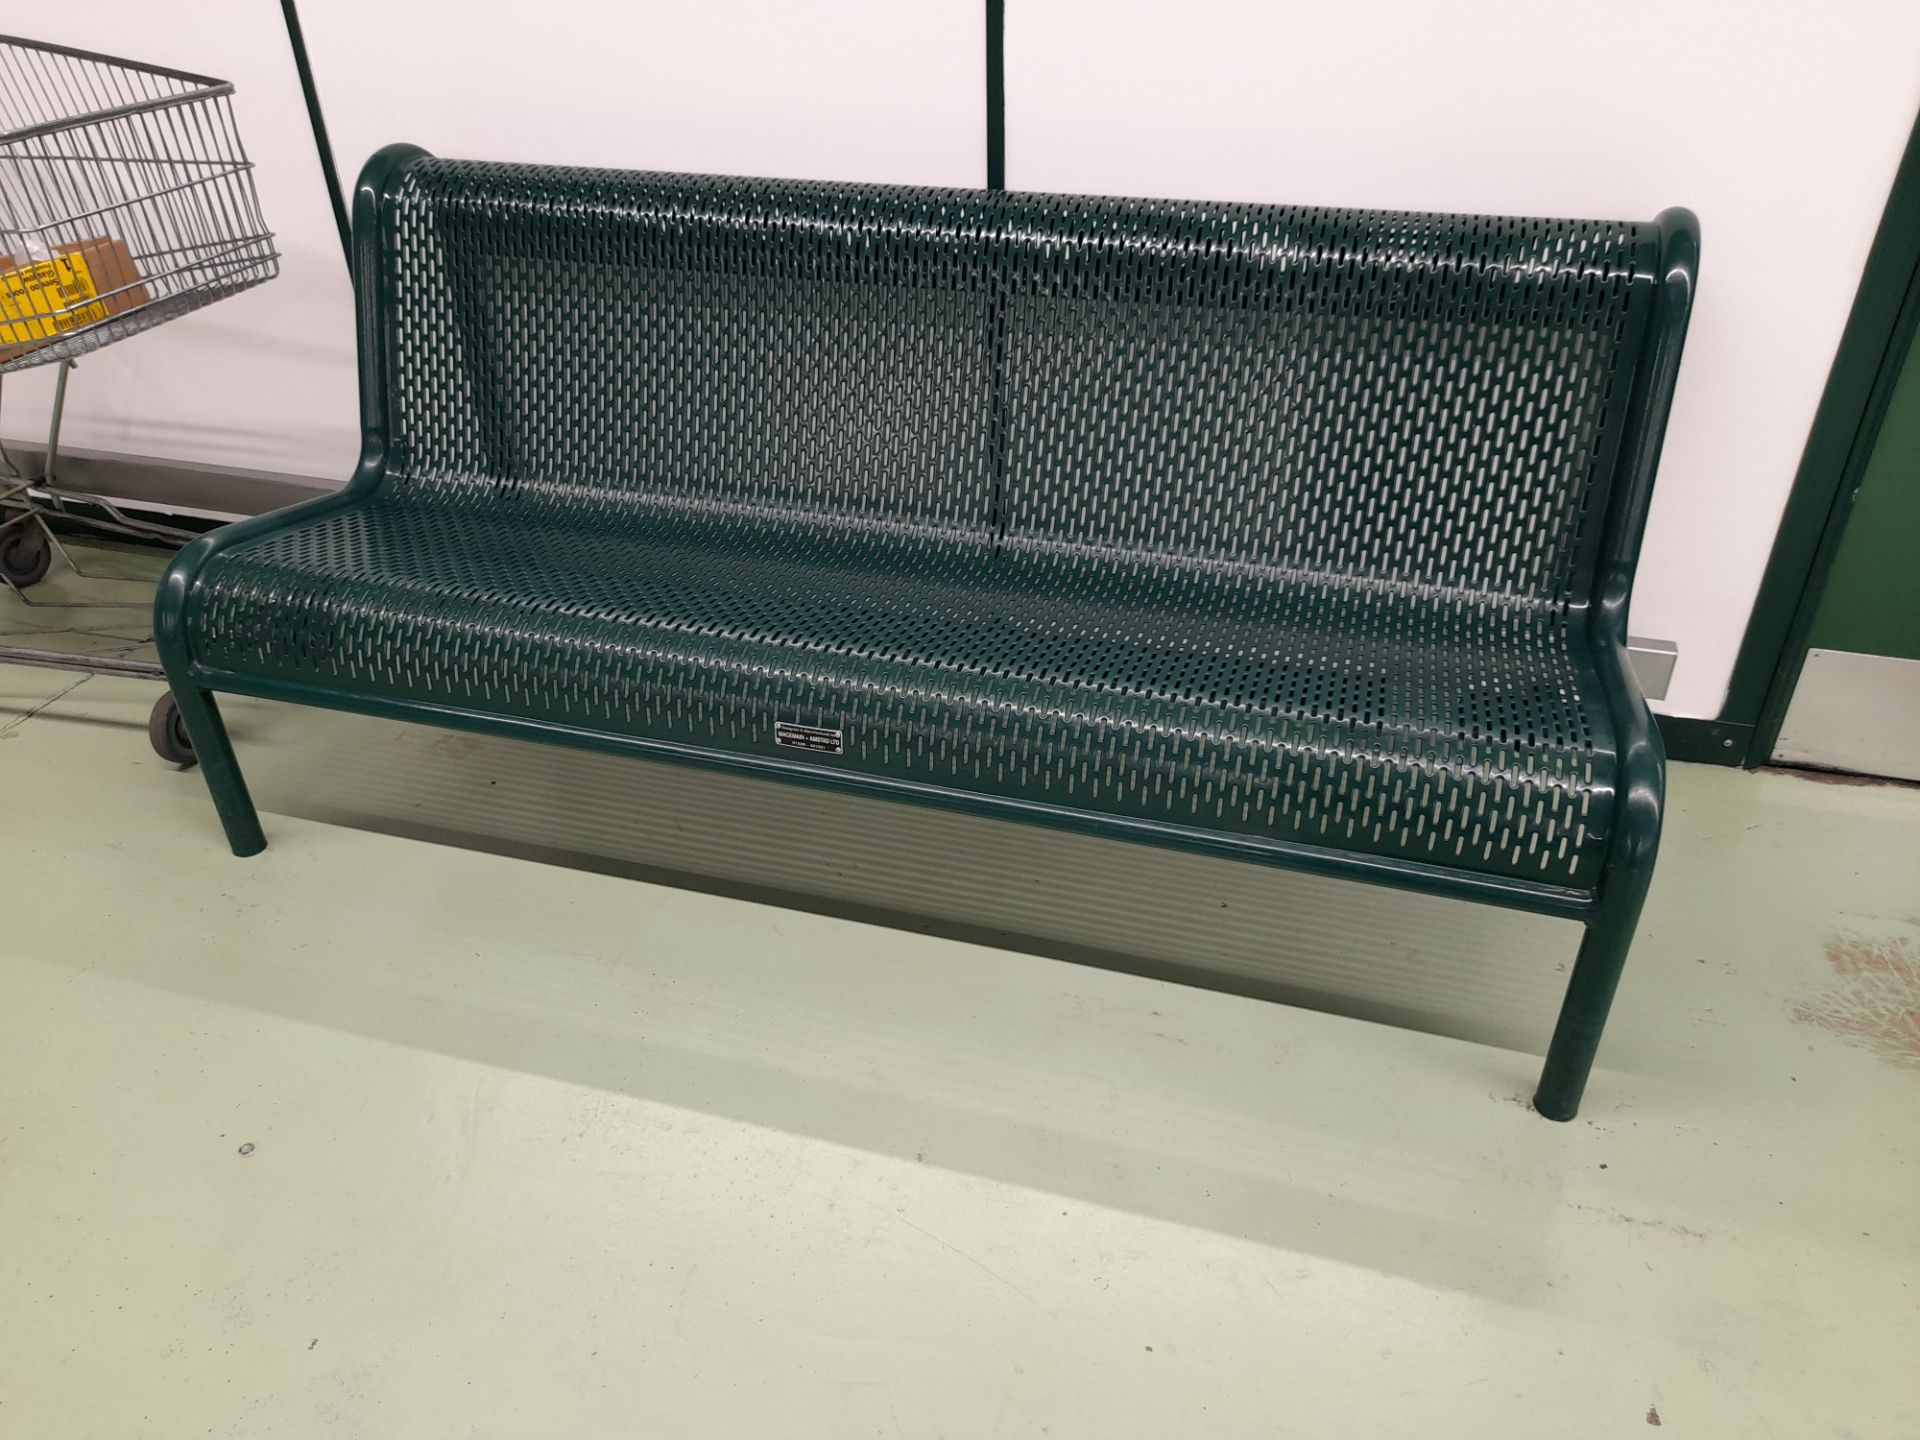 2 x Macemain & Amstad Ltd plastic-coated steel benches (only available for removal Friday 5th